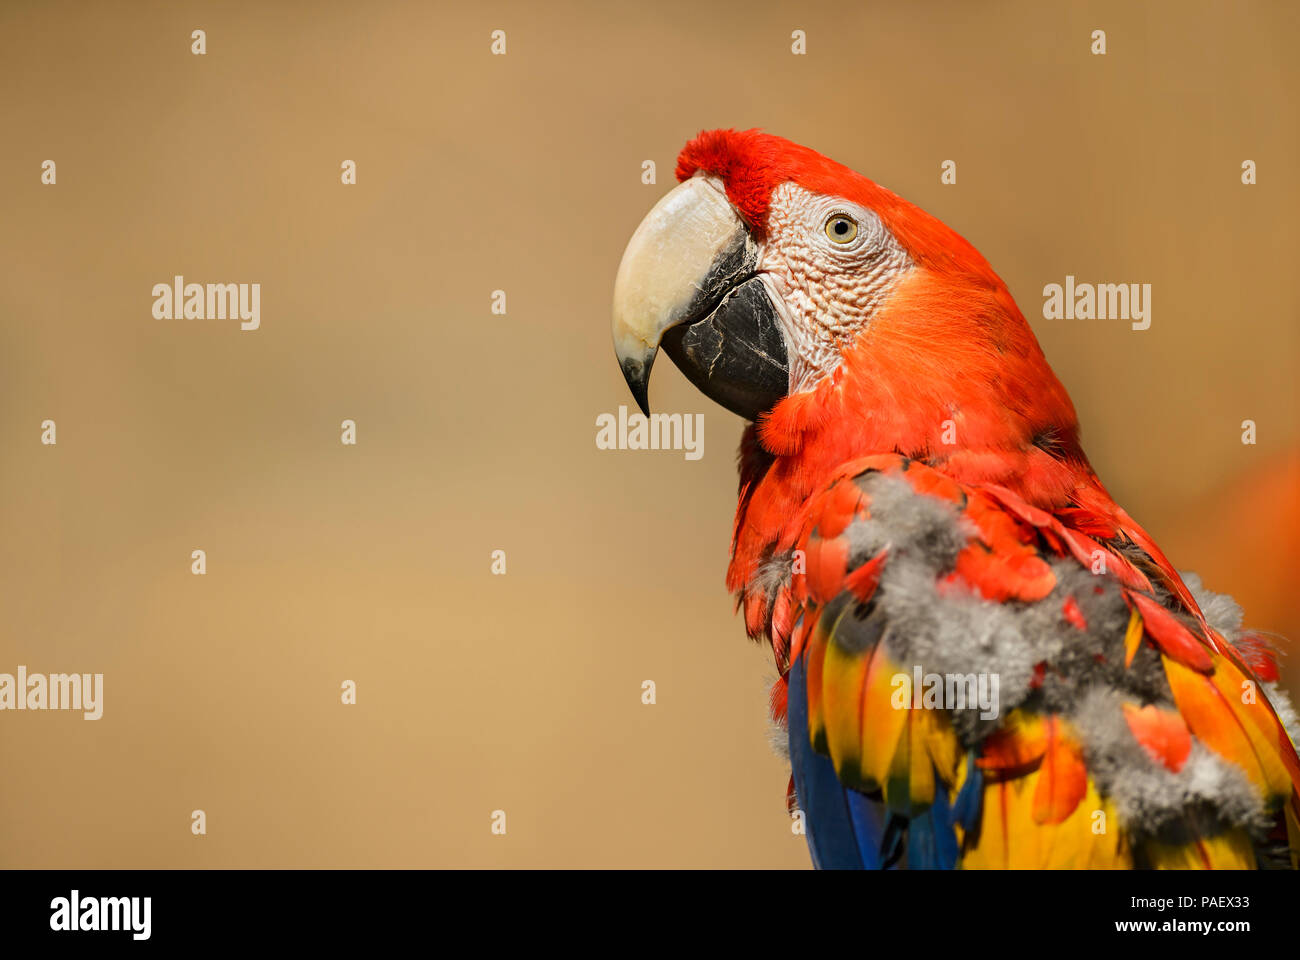 Scarlet Macaw - Ara macao, large beautiful colorful parrot from Central America forests, Costa Rica. Stock Photo